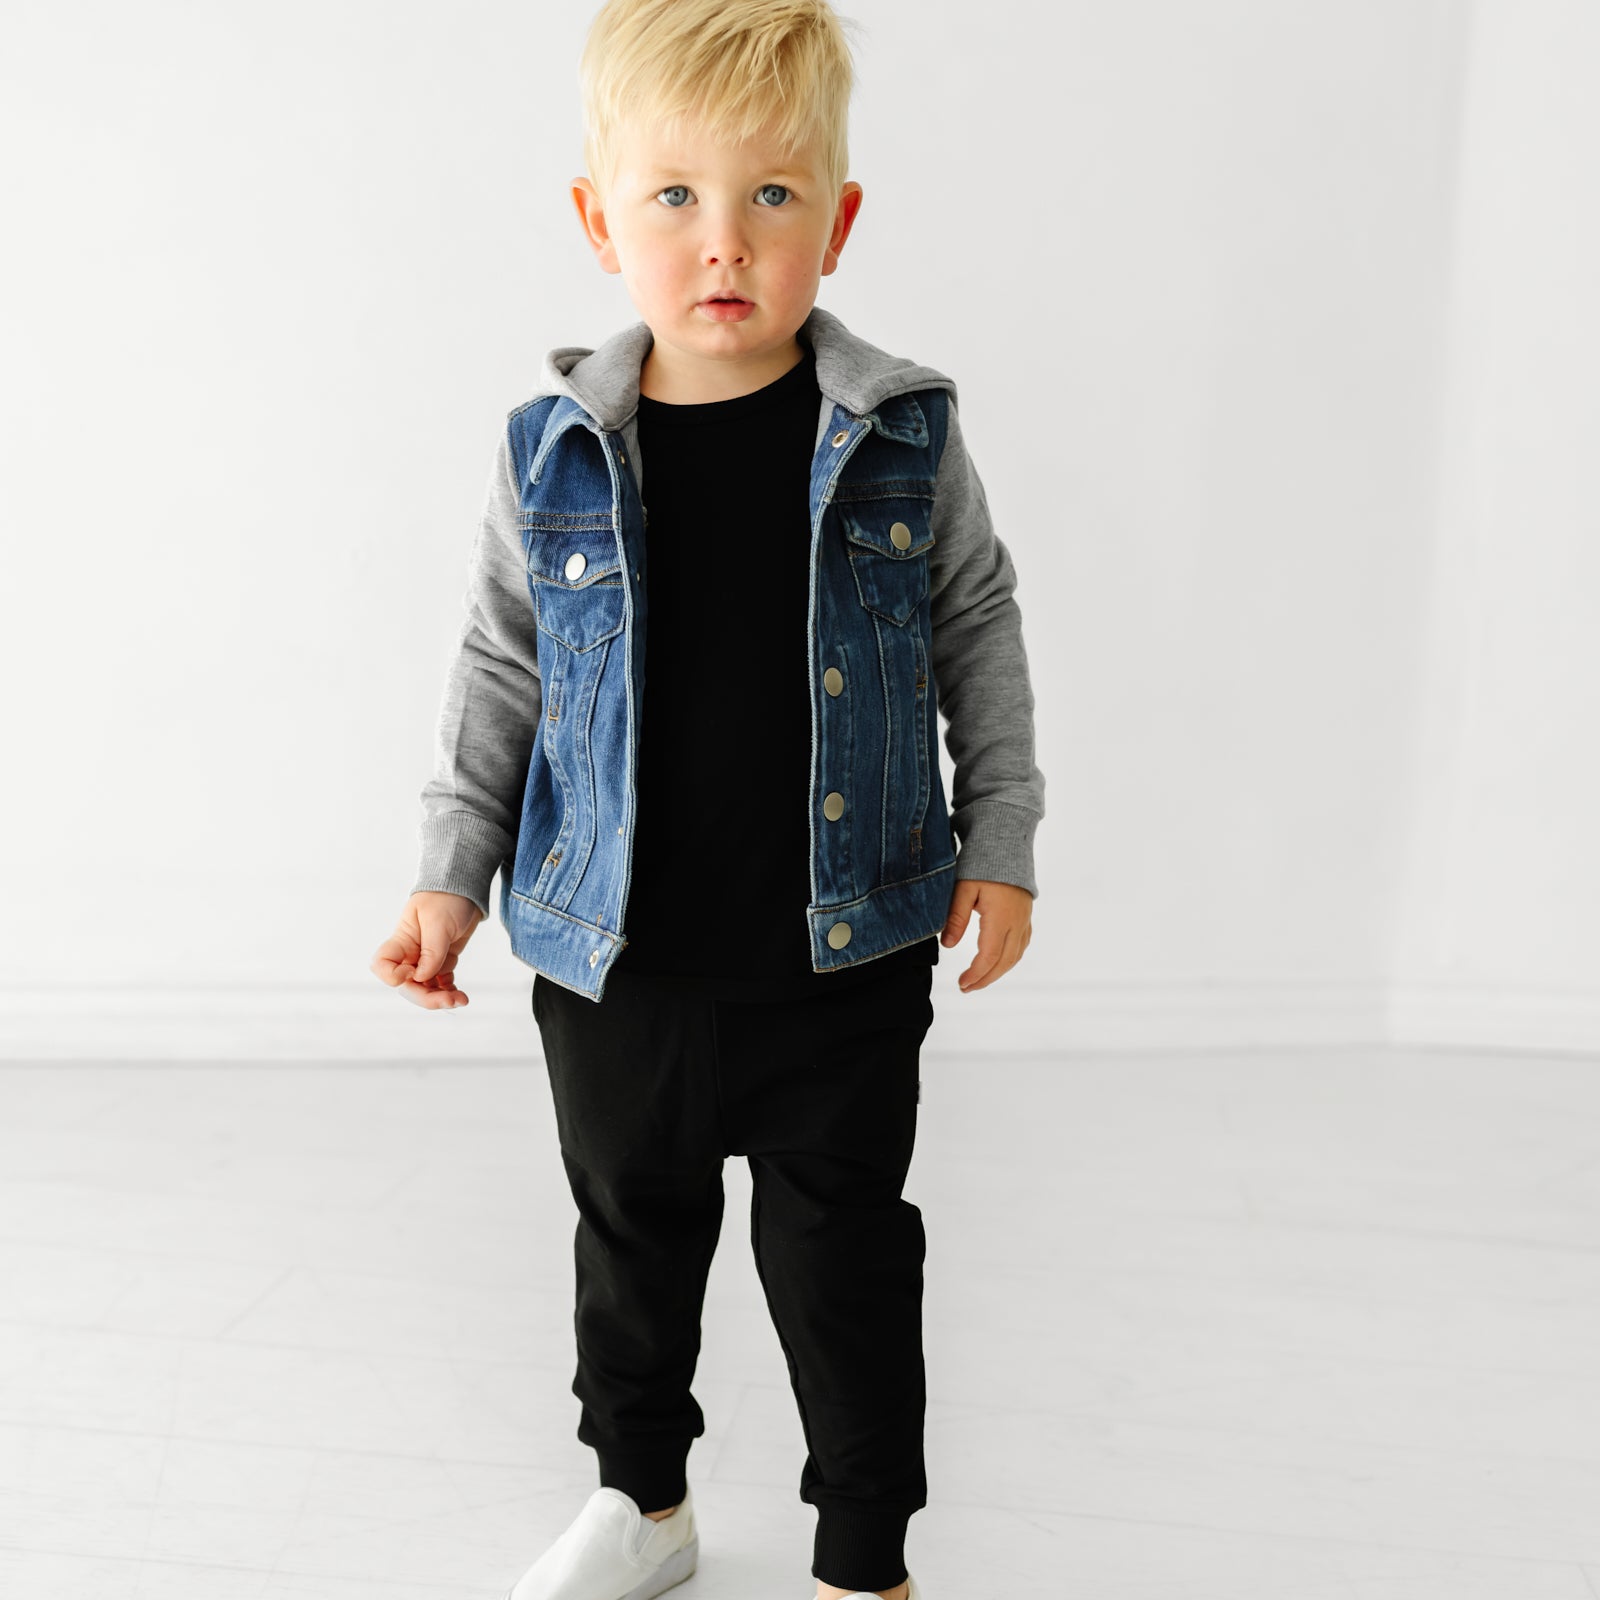 Child wearing a Midwash Blue Denim jacket and coordinating Play outfit